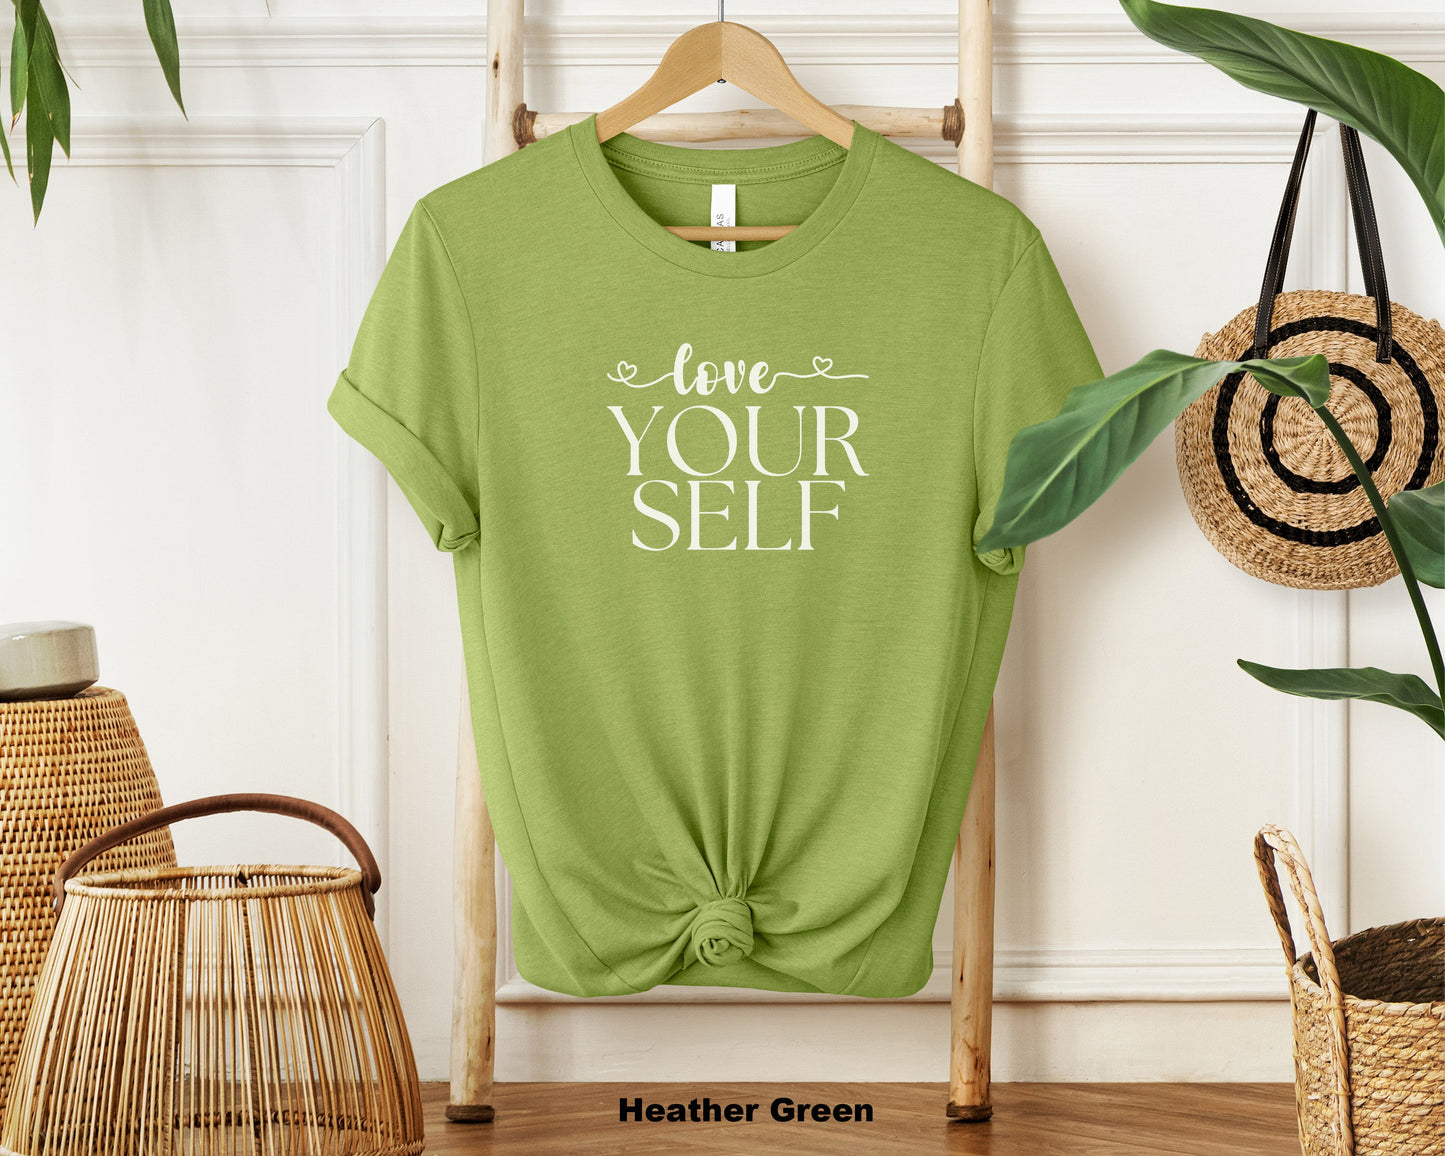 "Love Yourself Inspirational Classic Unisex Short Sleeve Crewneck T-Shirt in Soft Cotton Material"